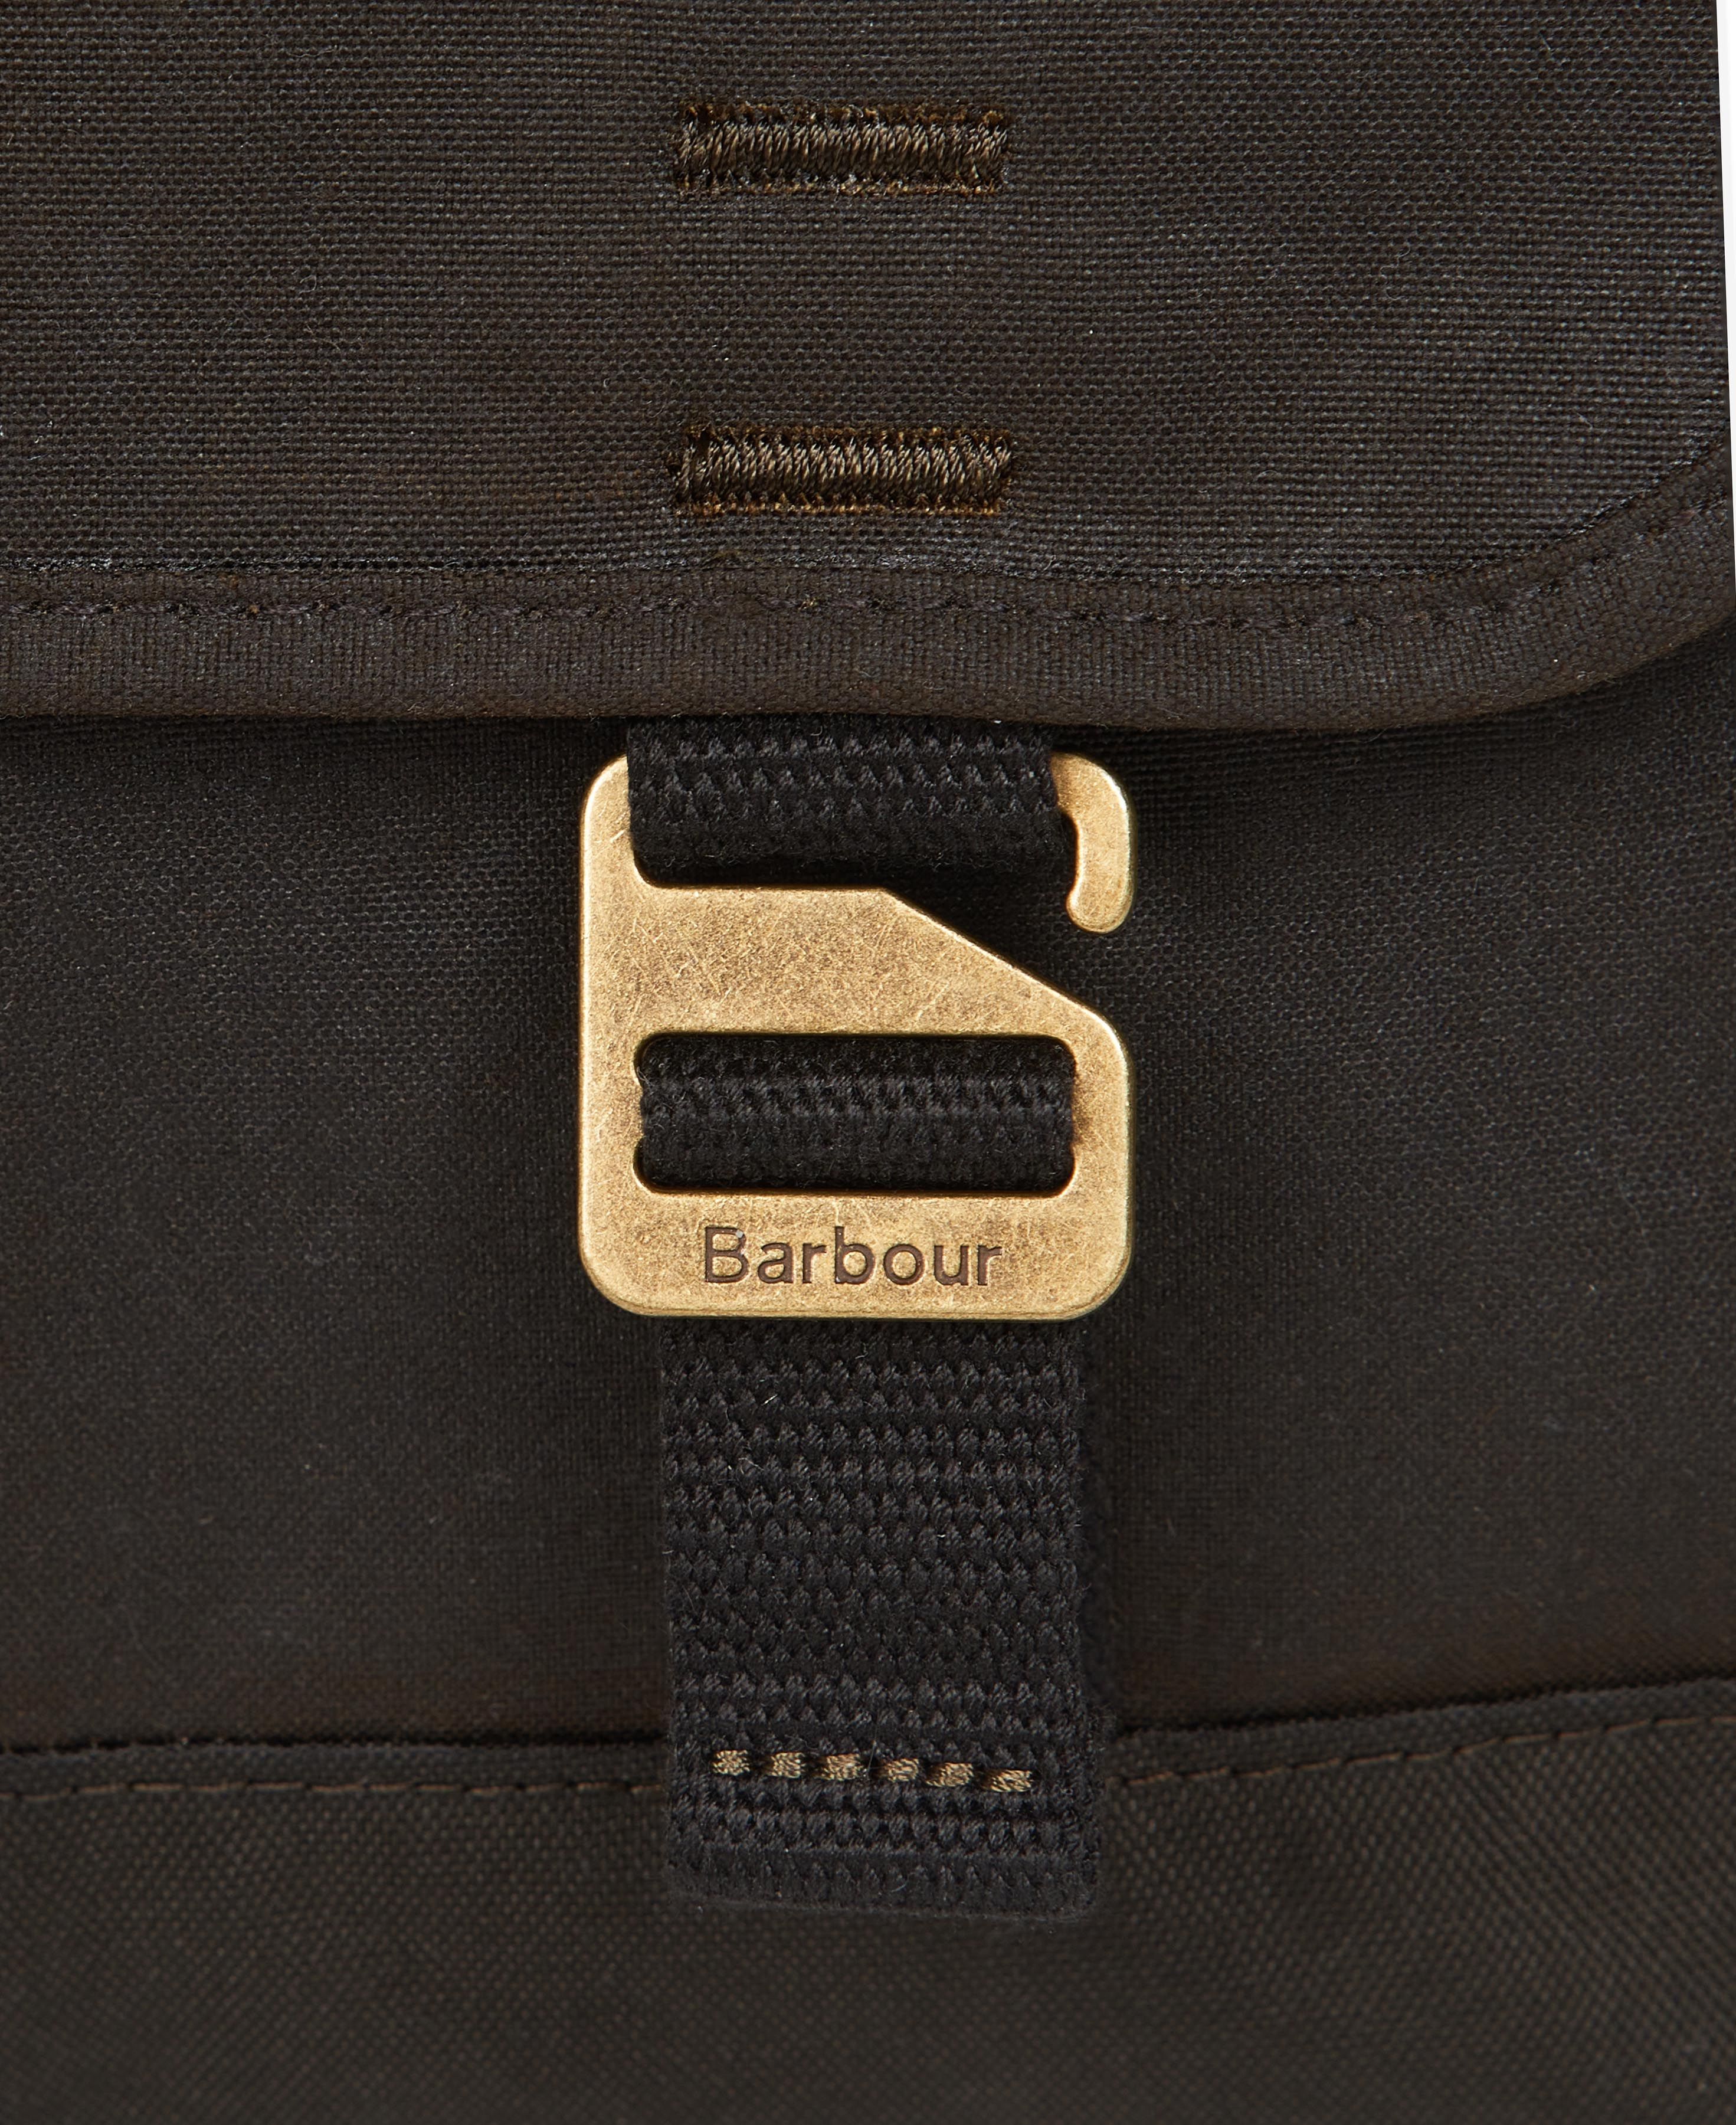 Shop the Barbour Essential Wax Messenger Bag in Olive | Barbour